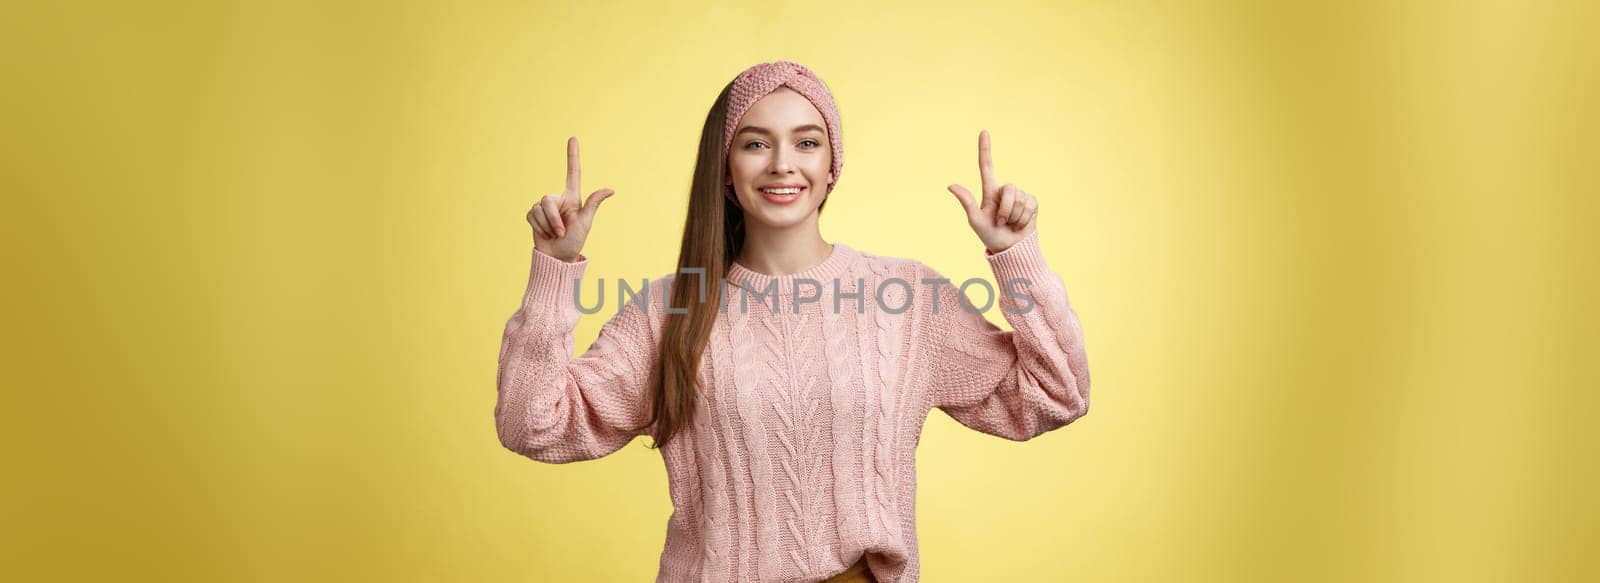 Easygoing beautiful young female student in knitted sweater, headband pointing up, promoting advertisement, smiling happily, feeling positive posing in good mood, grinning at camera over yellow wall.